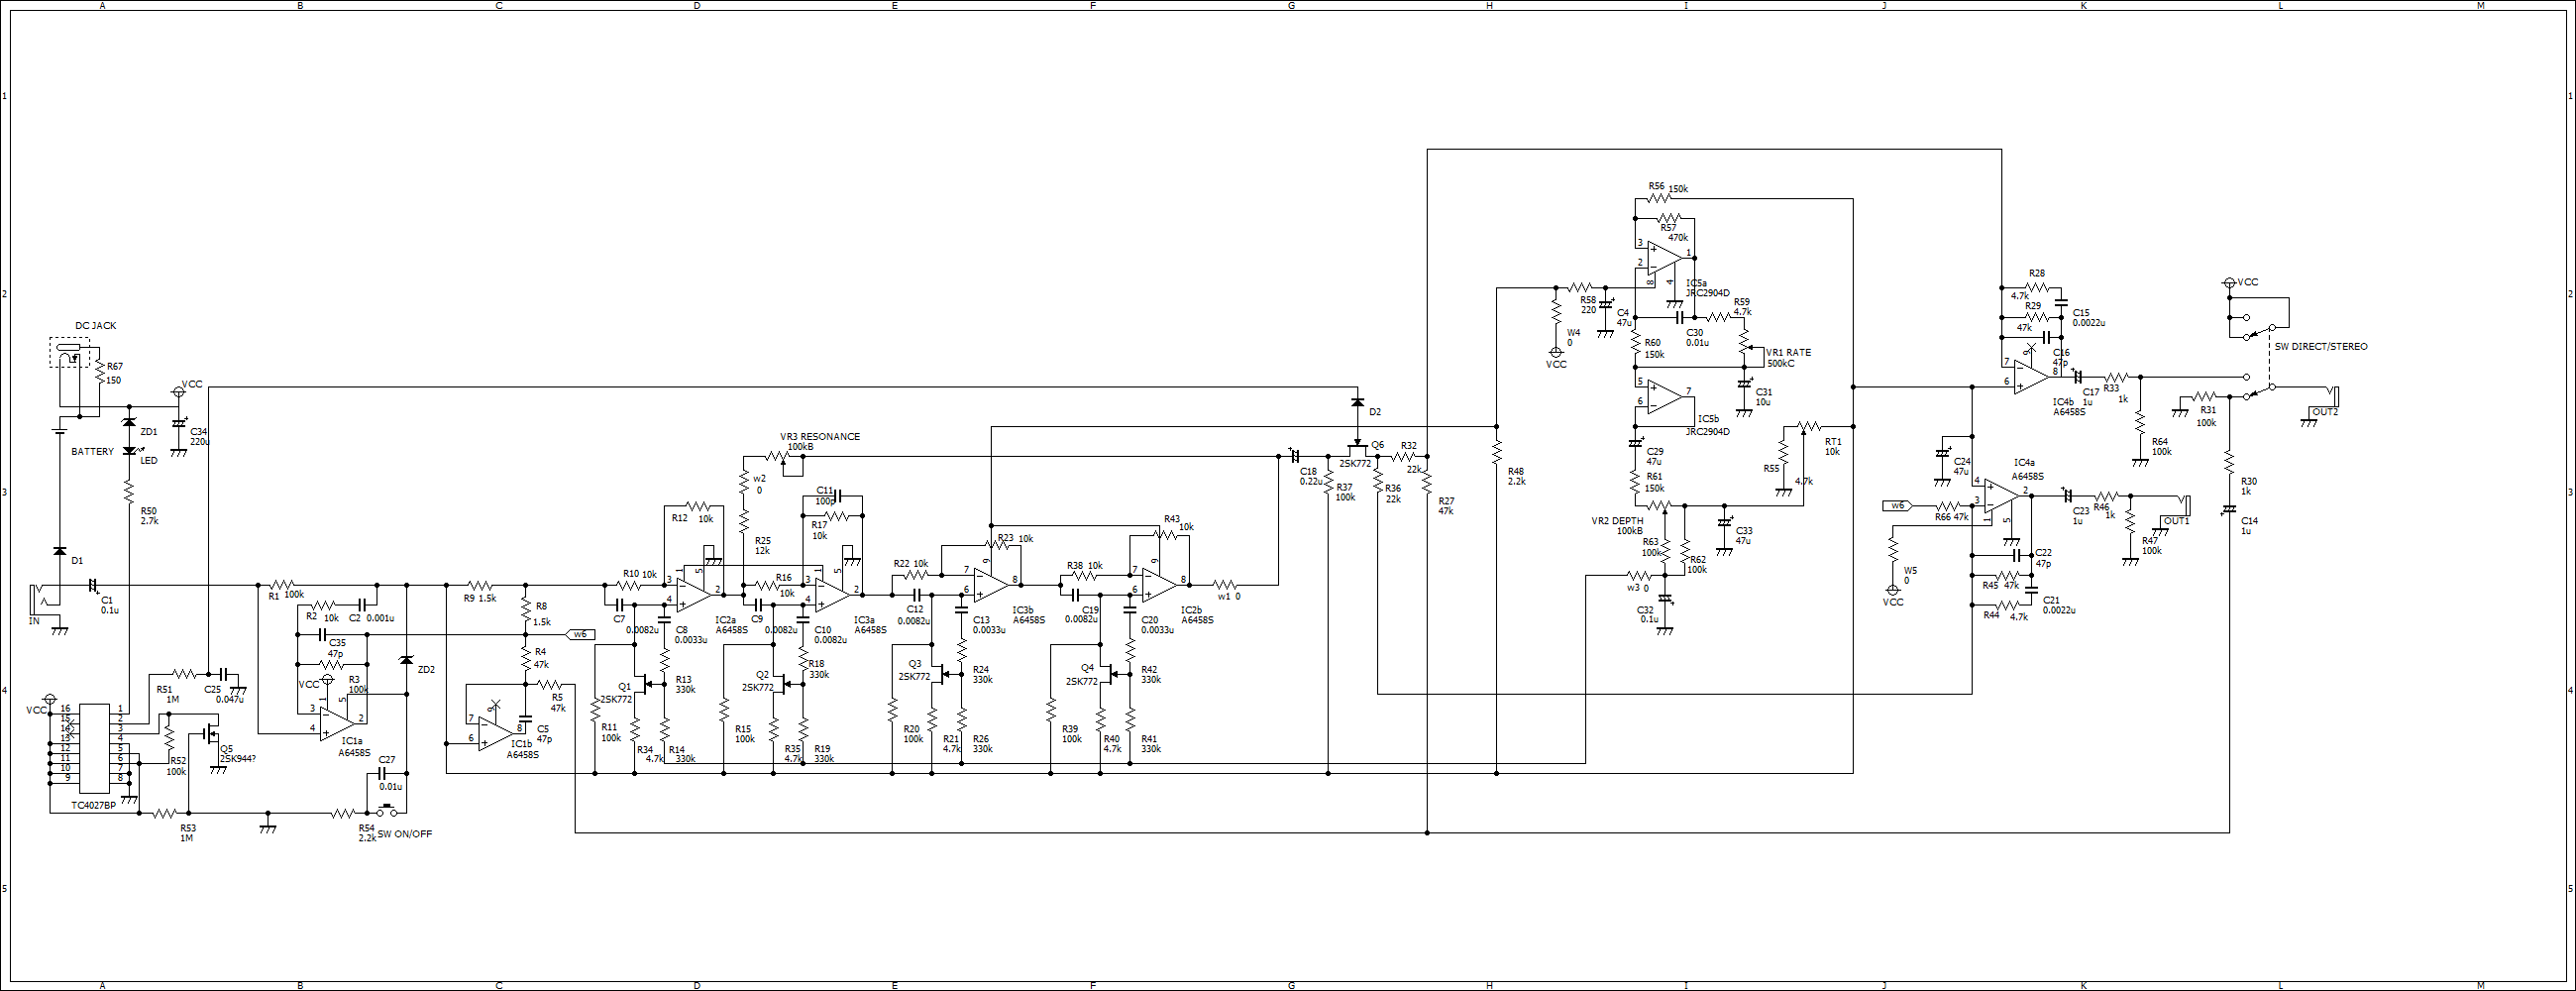 Arion SPH1 phaser schematic - freestompboxes.org